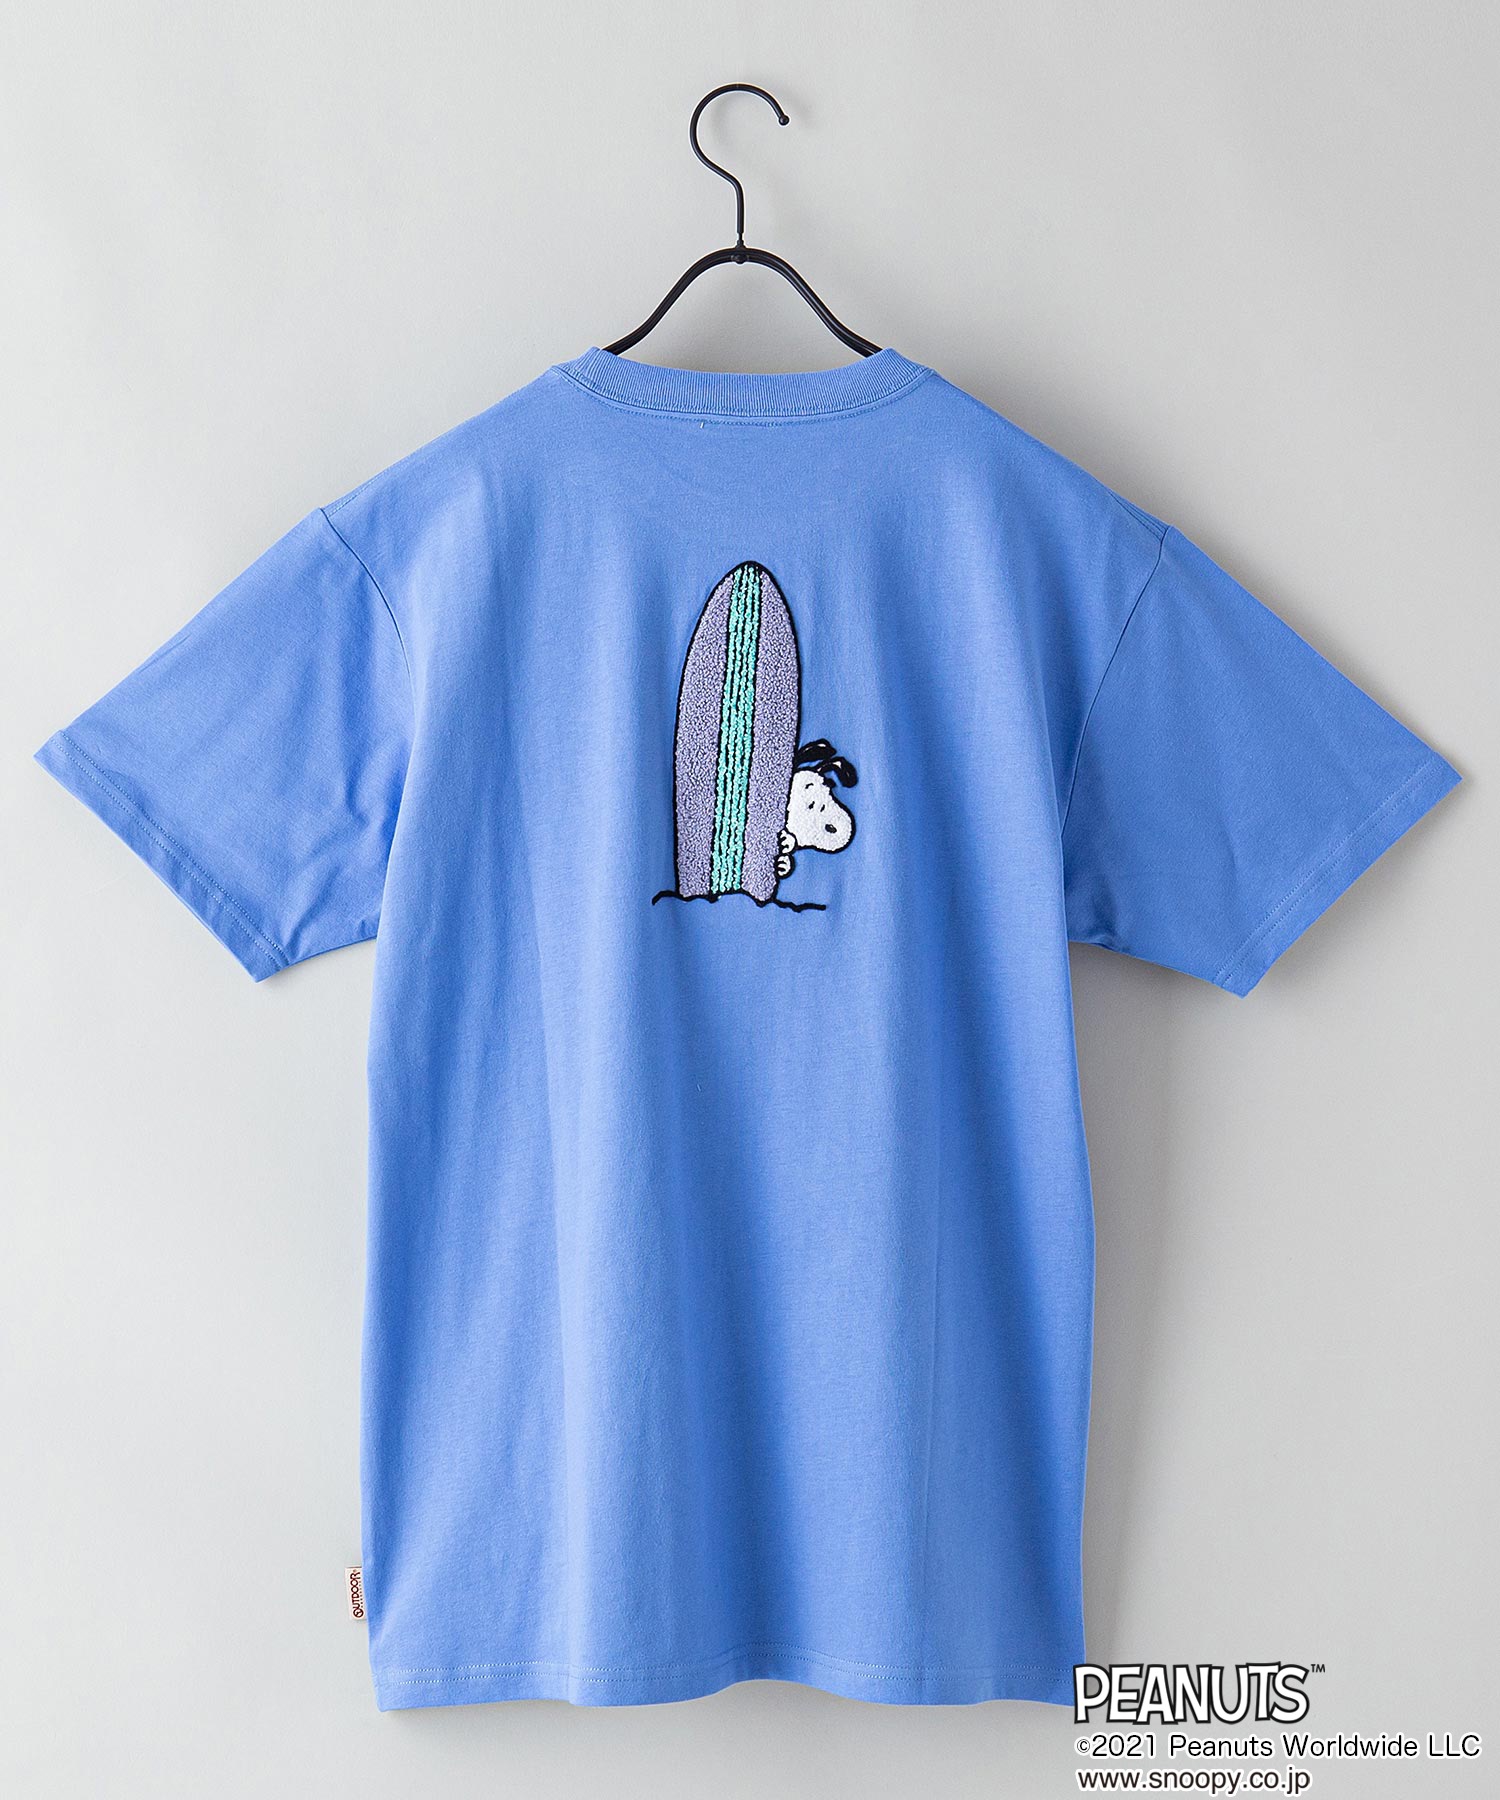 Peanuts ピーナッツ プリントｔシャツ Outdoor Products Apparel アウトドアプロダクツ Outdoor Products 公式通販サイト